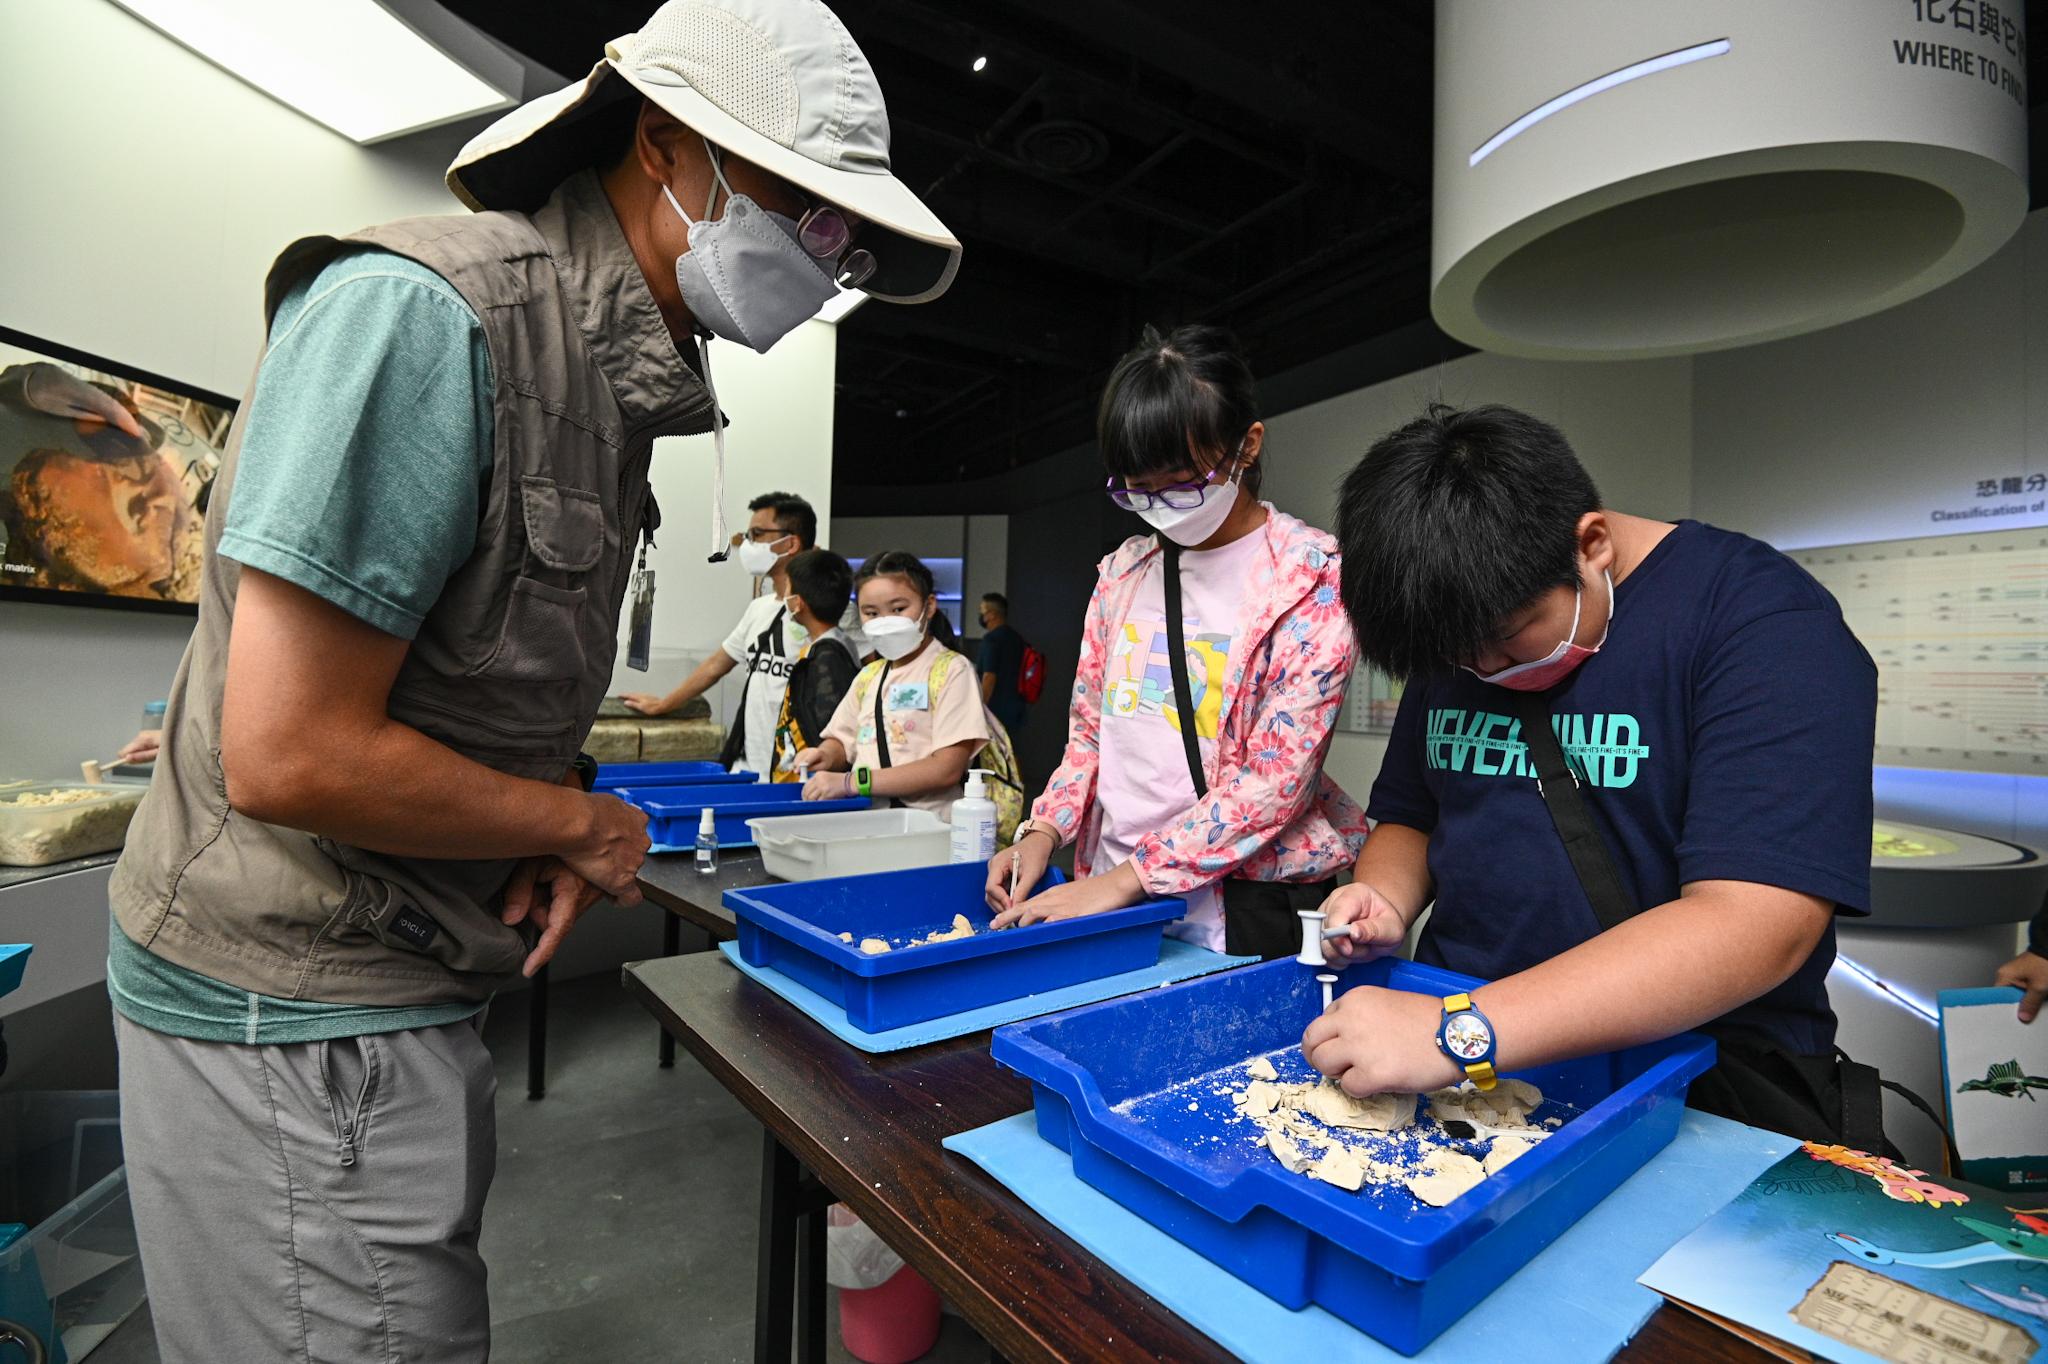 The Hong Kong Science Museum held the first session of "A Night with Dinosaurs" sleepover programme last night (August 5). Participants had hands-on experiences of how palaeontologists unearth fossils.